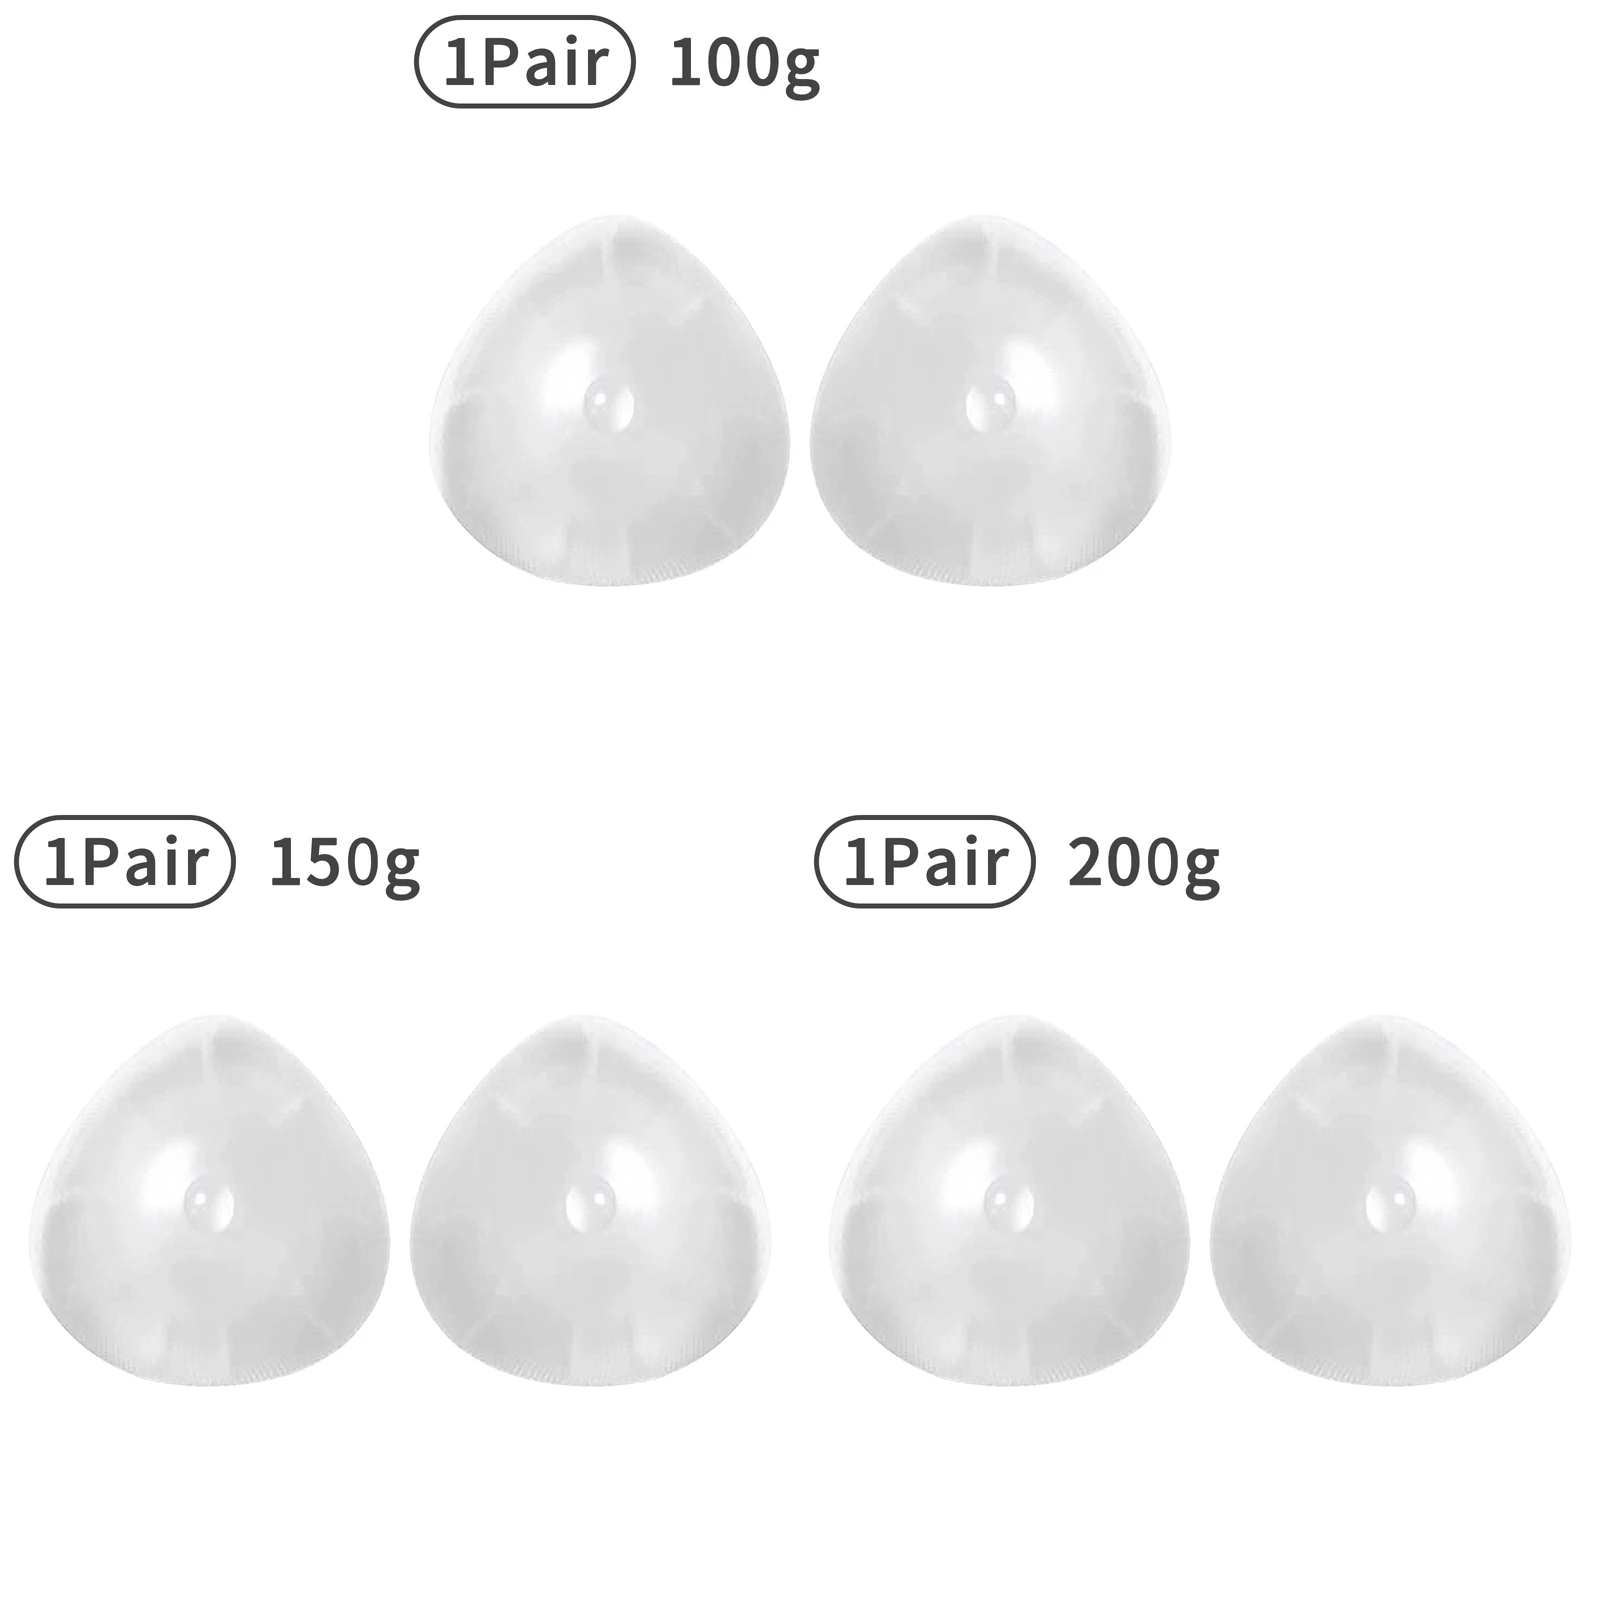 1Pair Adult Transparent Silicone Breast Implants Washable Triangle-Shaped Simulation Breasts Prosthesis Crossdresser Swimsuit